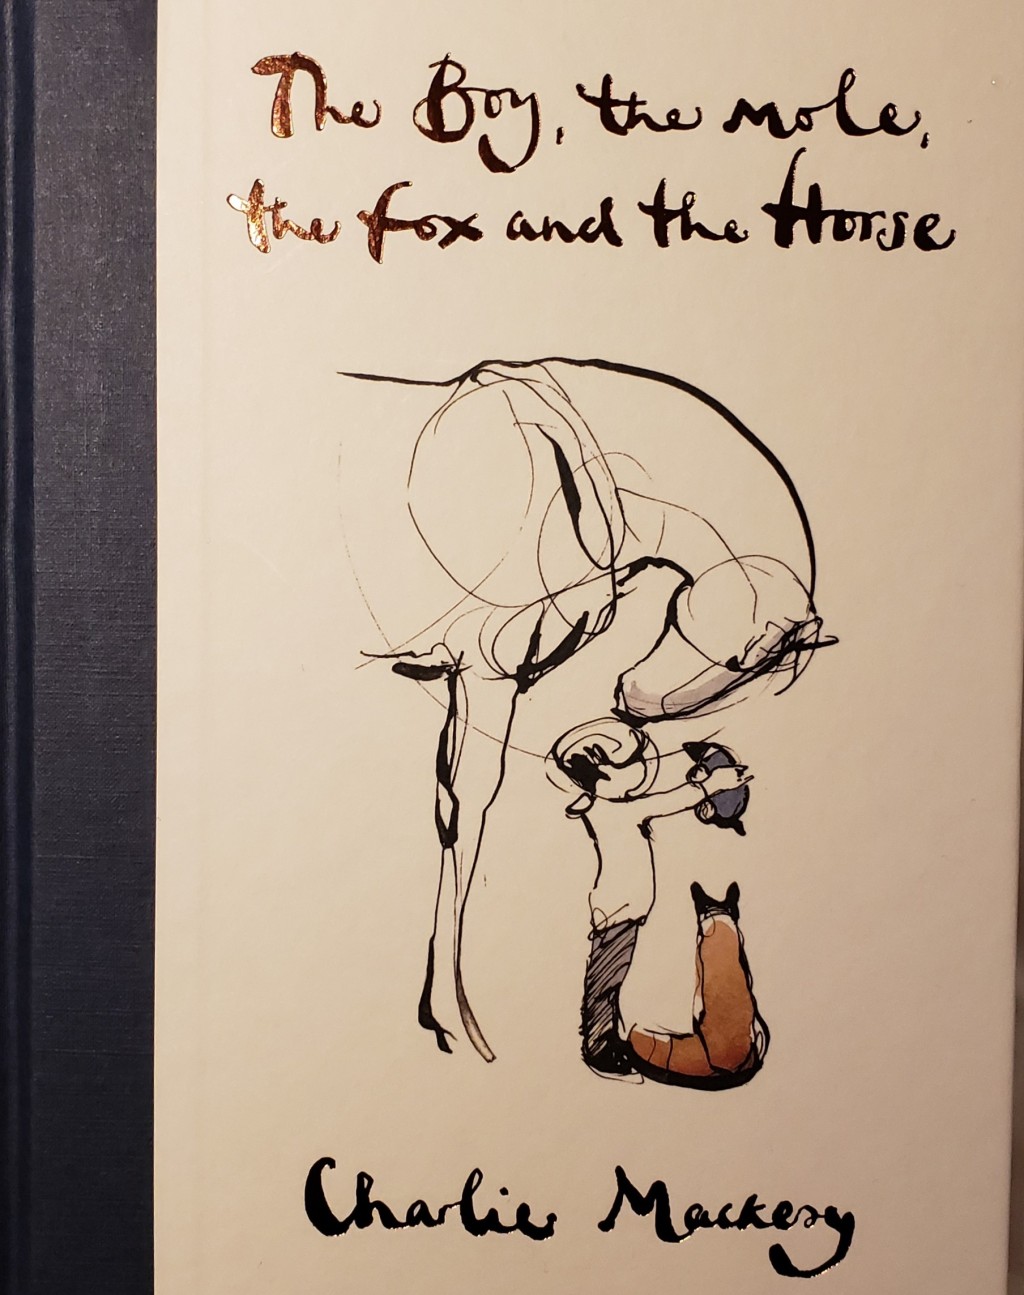 Book Review: The Boy, the Mole, the Fox and the Horse by Charlie Mackesy